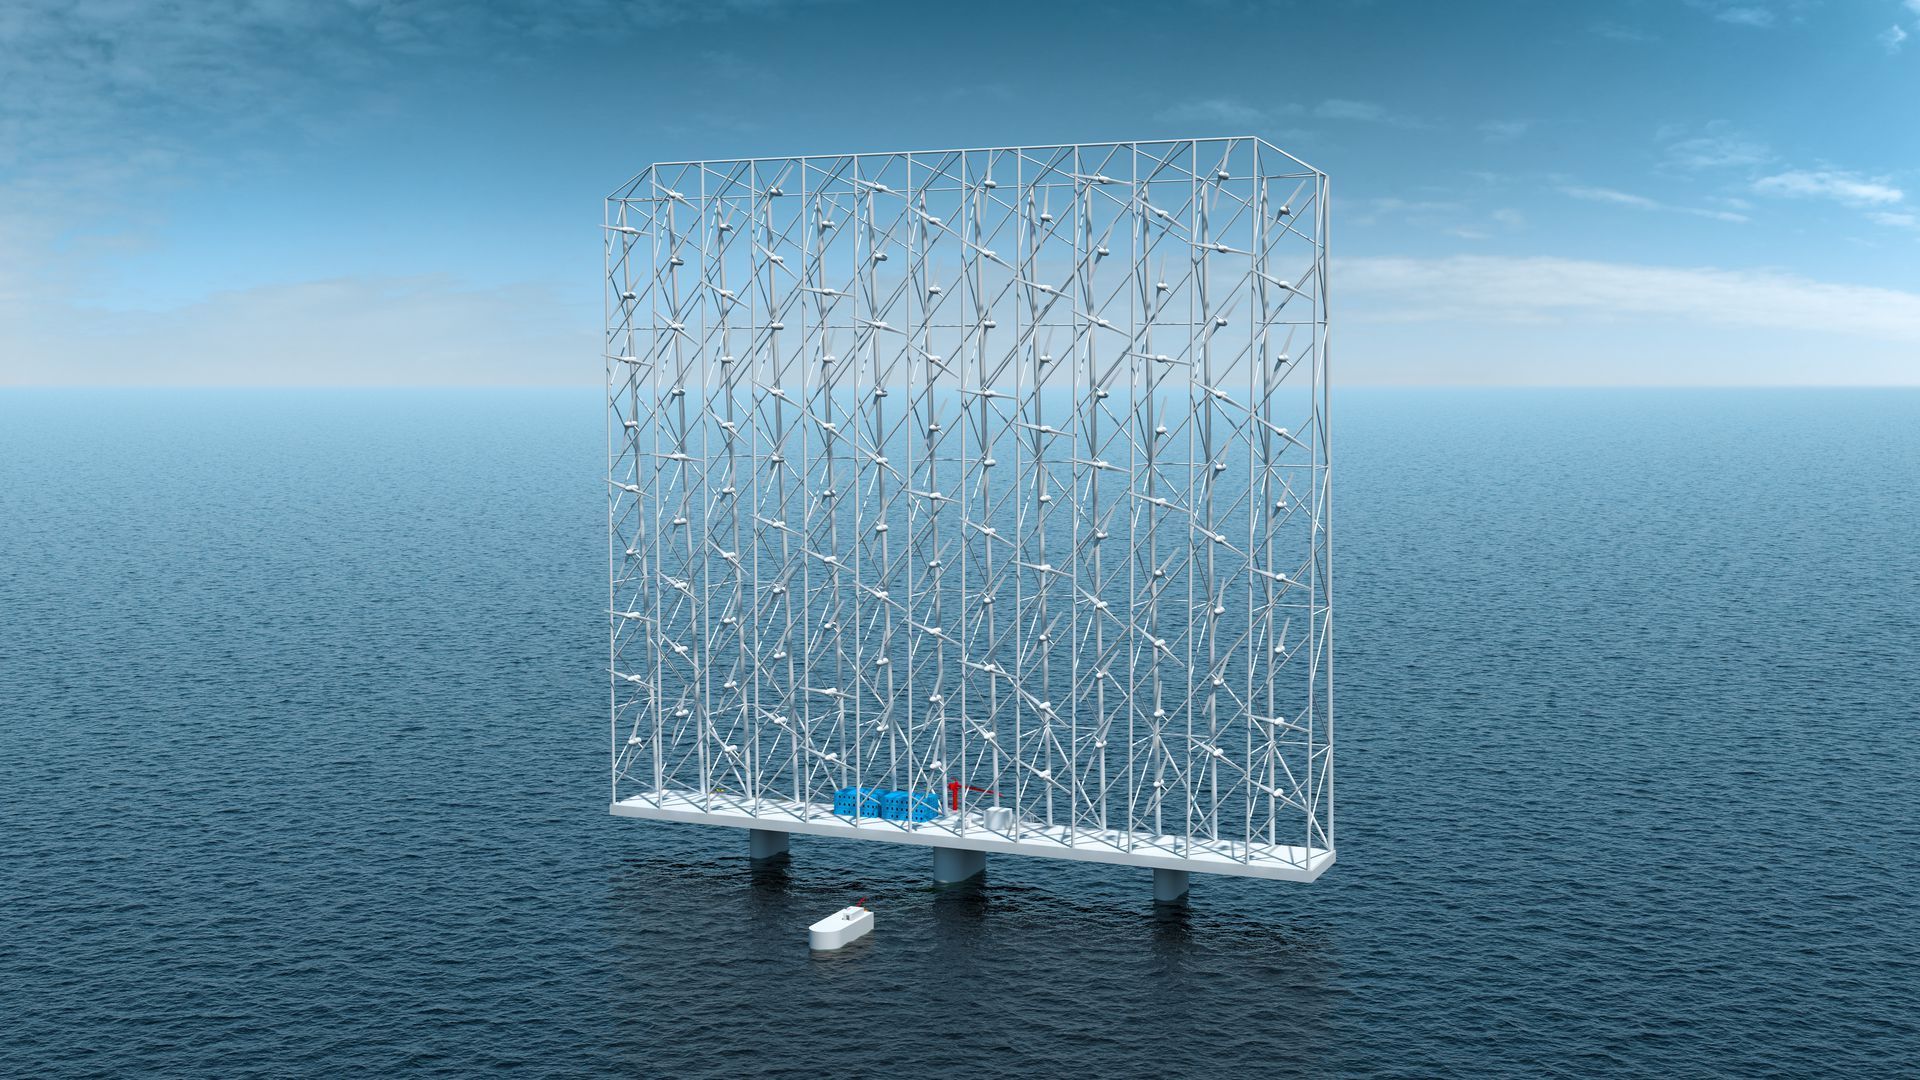 Image of a new offshore wind design that's many turbines in a grid system